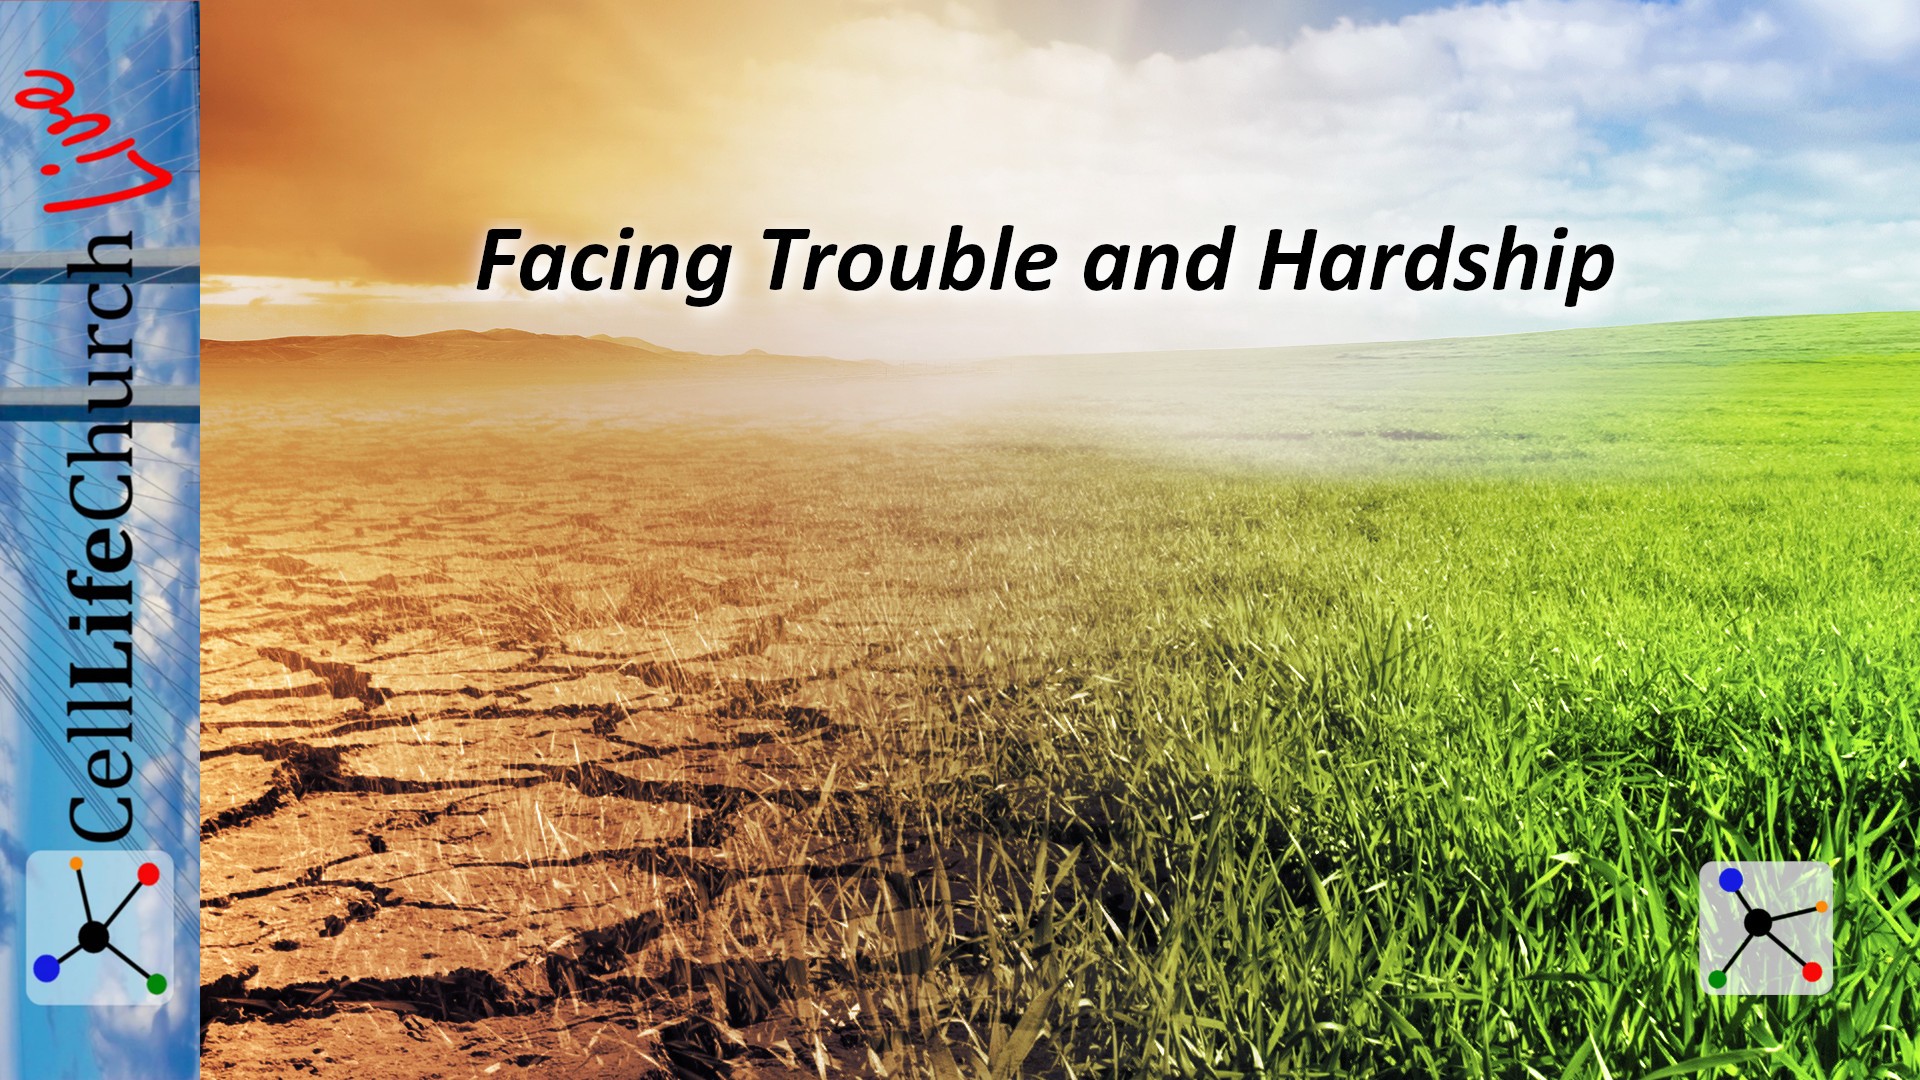 Facing Trouble and Hardship